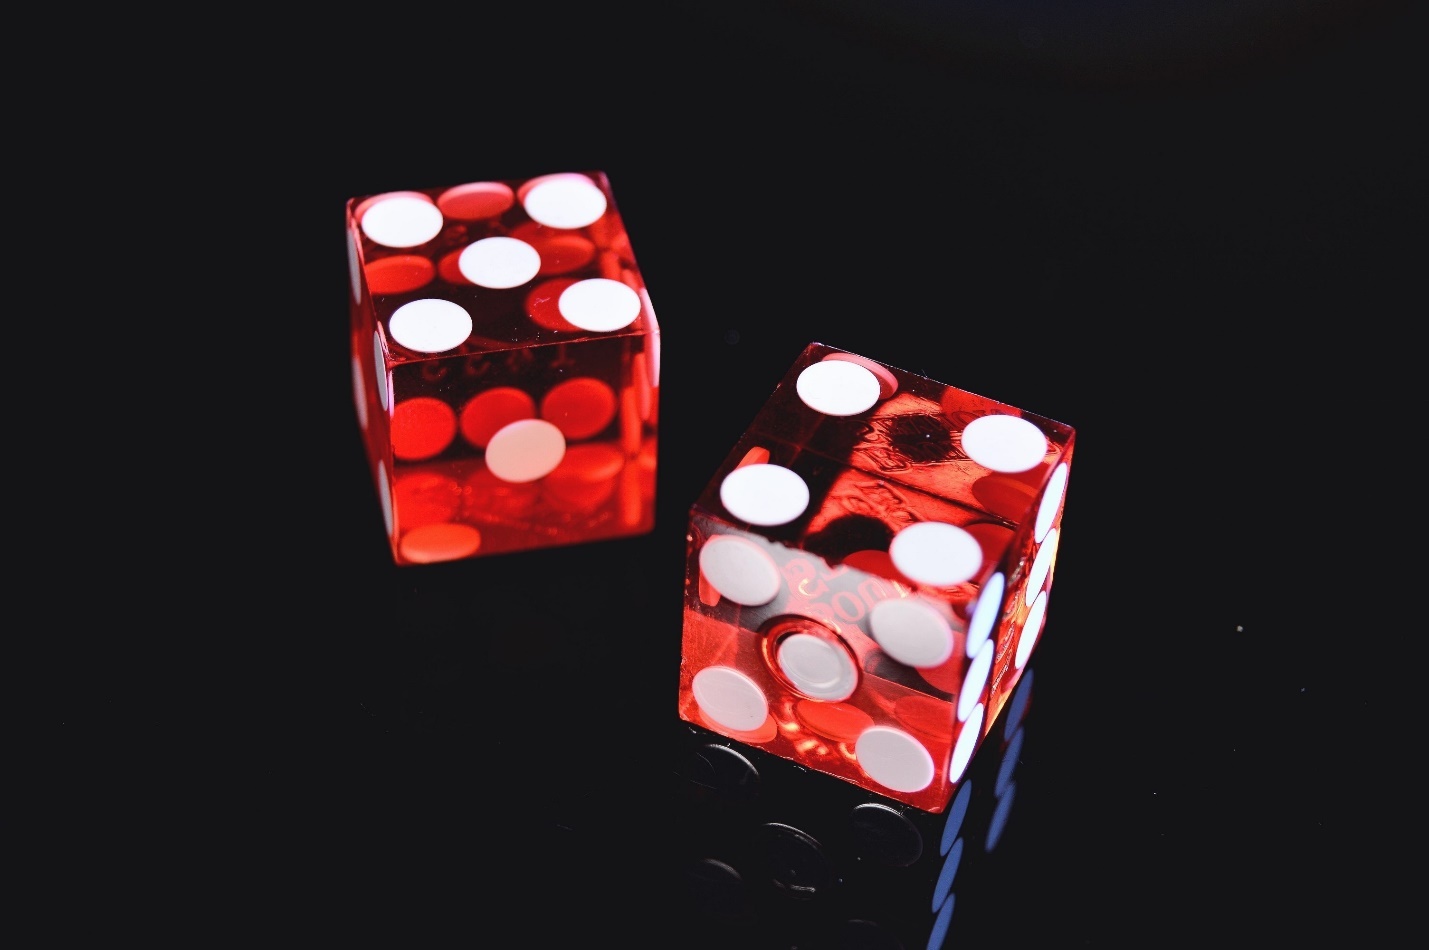 How Can You Find the Best Online Casinos for Your Needs and Preferences?